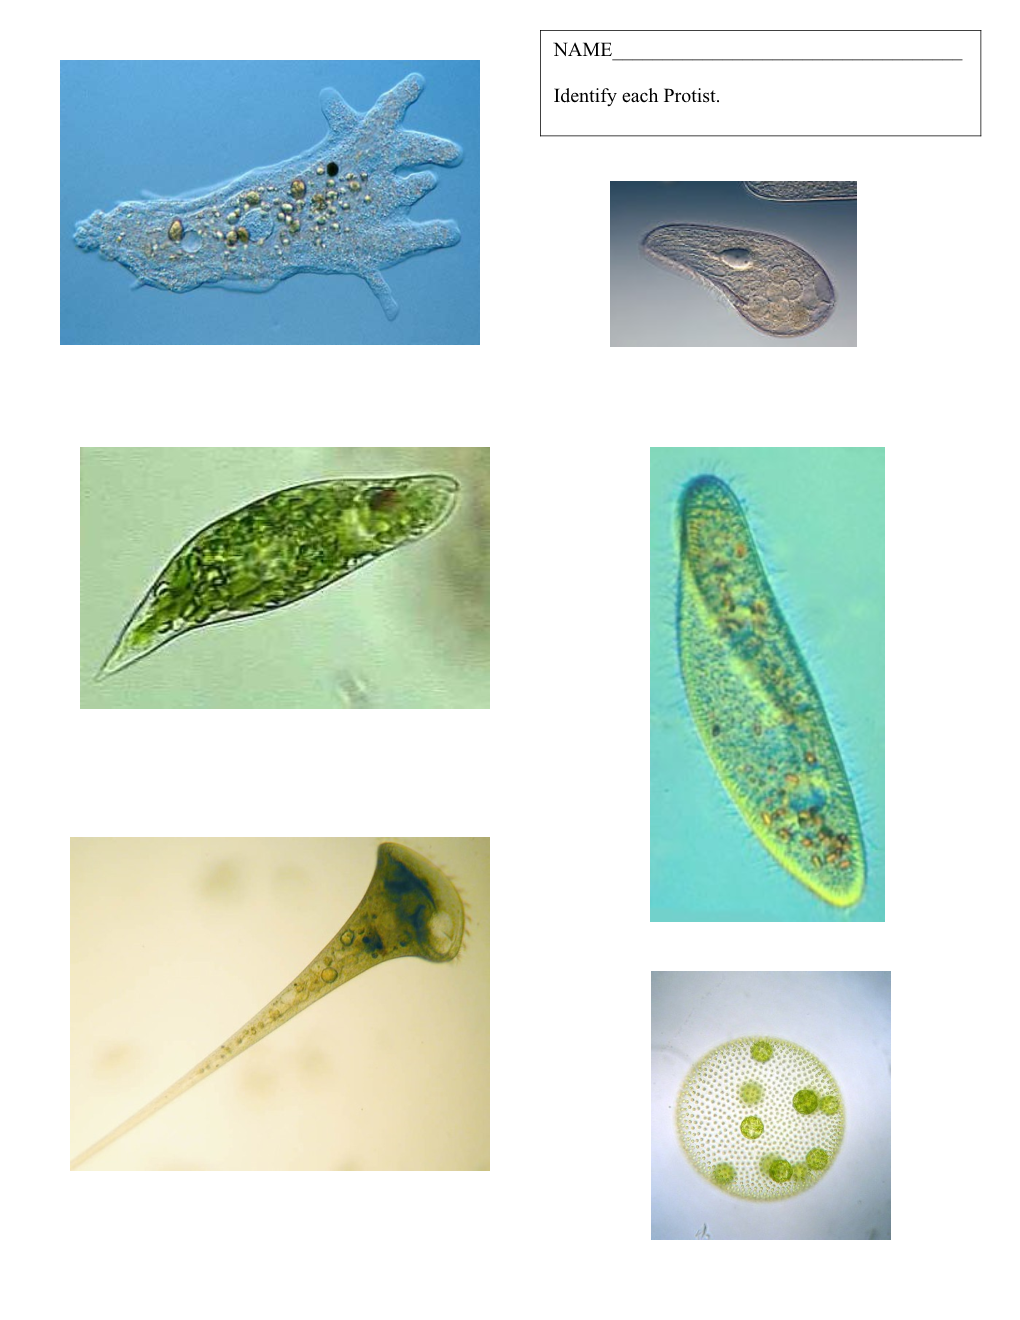 Paramecium Are Unicellular Protozoans Classified in the Phylum Ciliophora (Pronounced